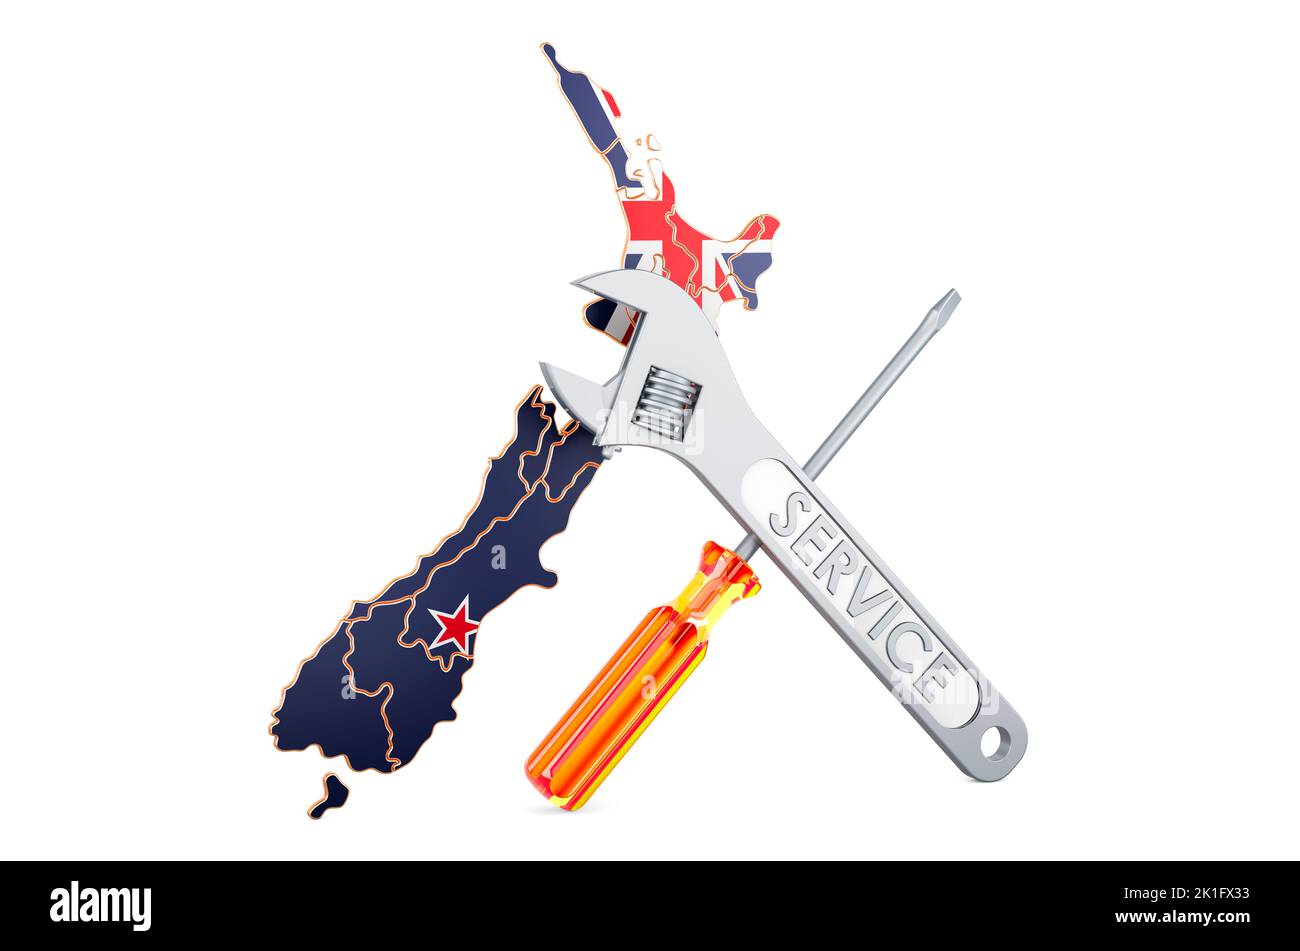 New Zealand map with screwdriver and wrench, 3D rendering isolated on white background Stock Photo